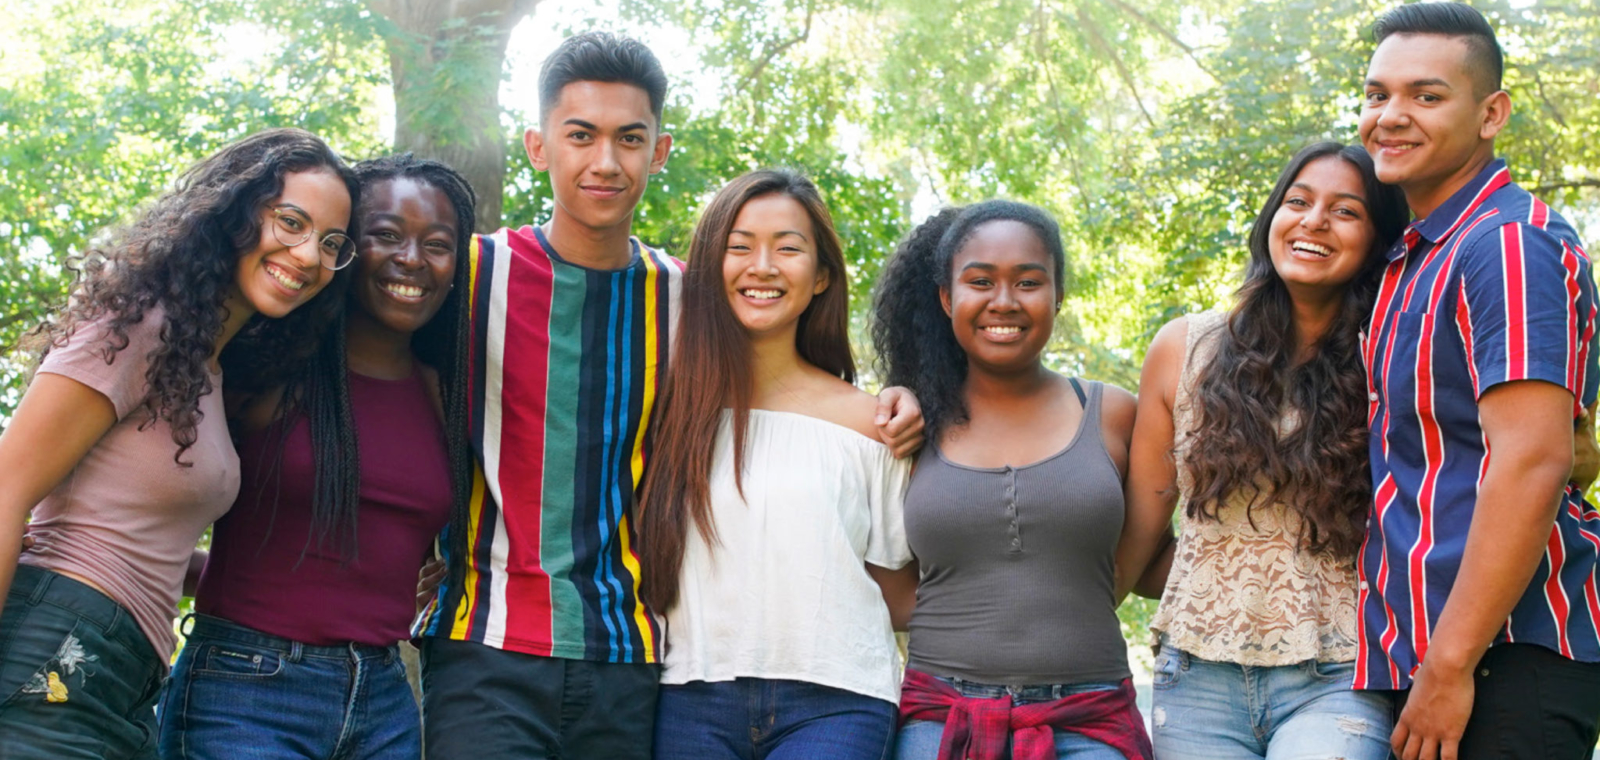 Website development placeholder image of a group of kids with different ethnicities